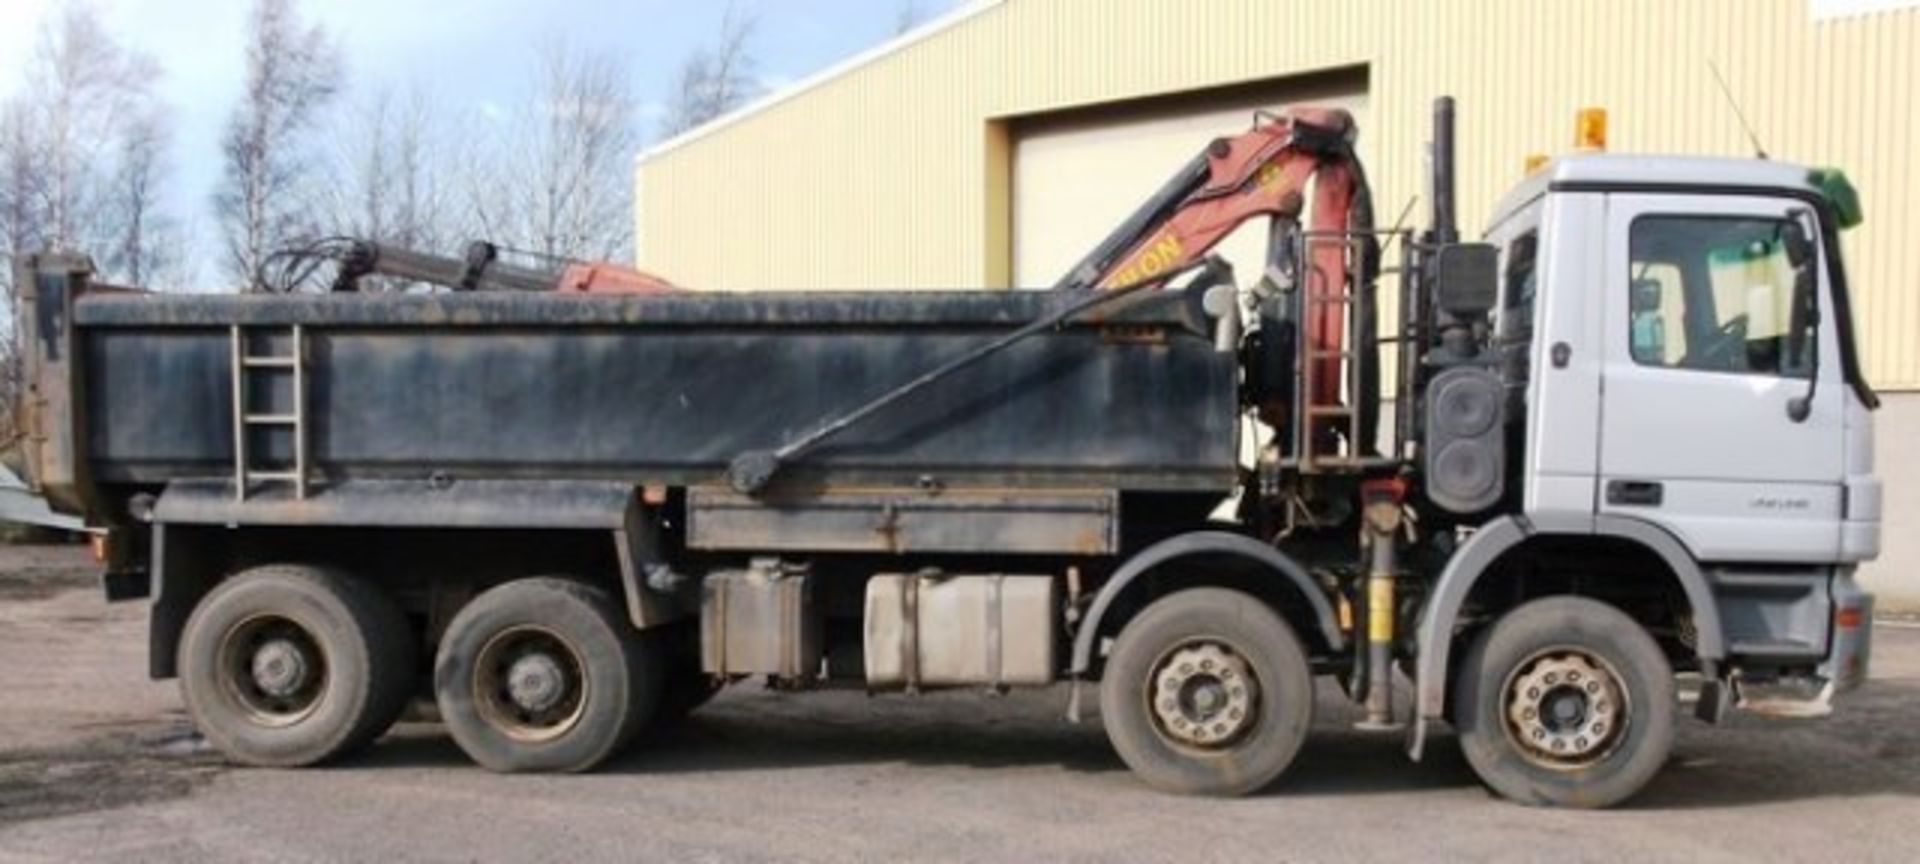 MERCEDES ACTROS 3236k - 11946cc -
Body: 2 Dr Truck
Color: Silver
First Reg: 08/03/2005
Doors: 2
MOT: - Image 13 of 18